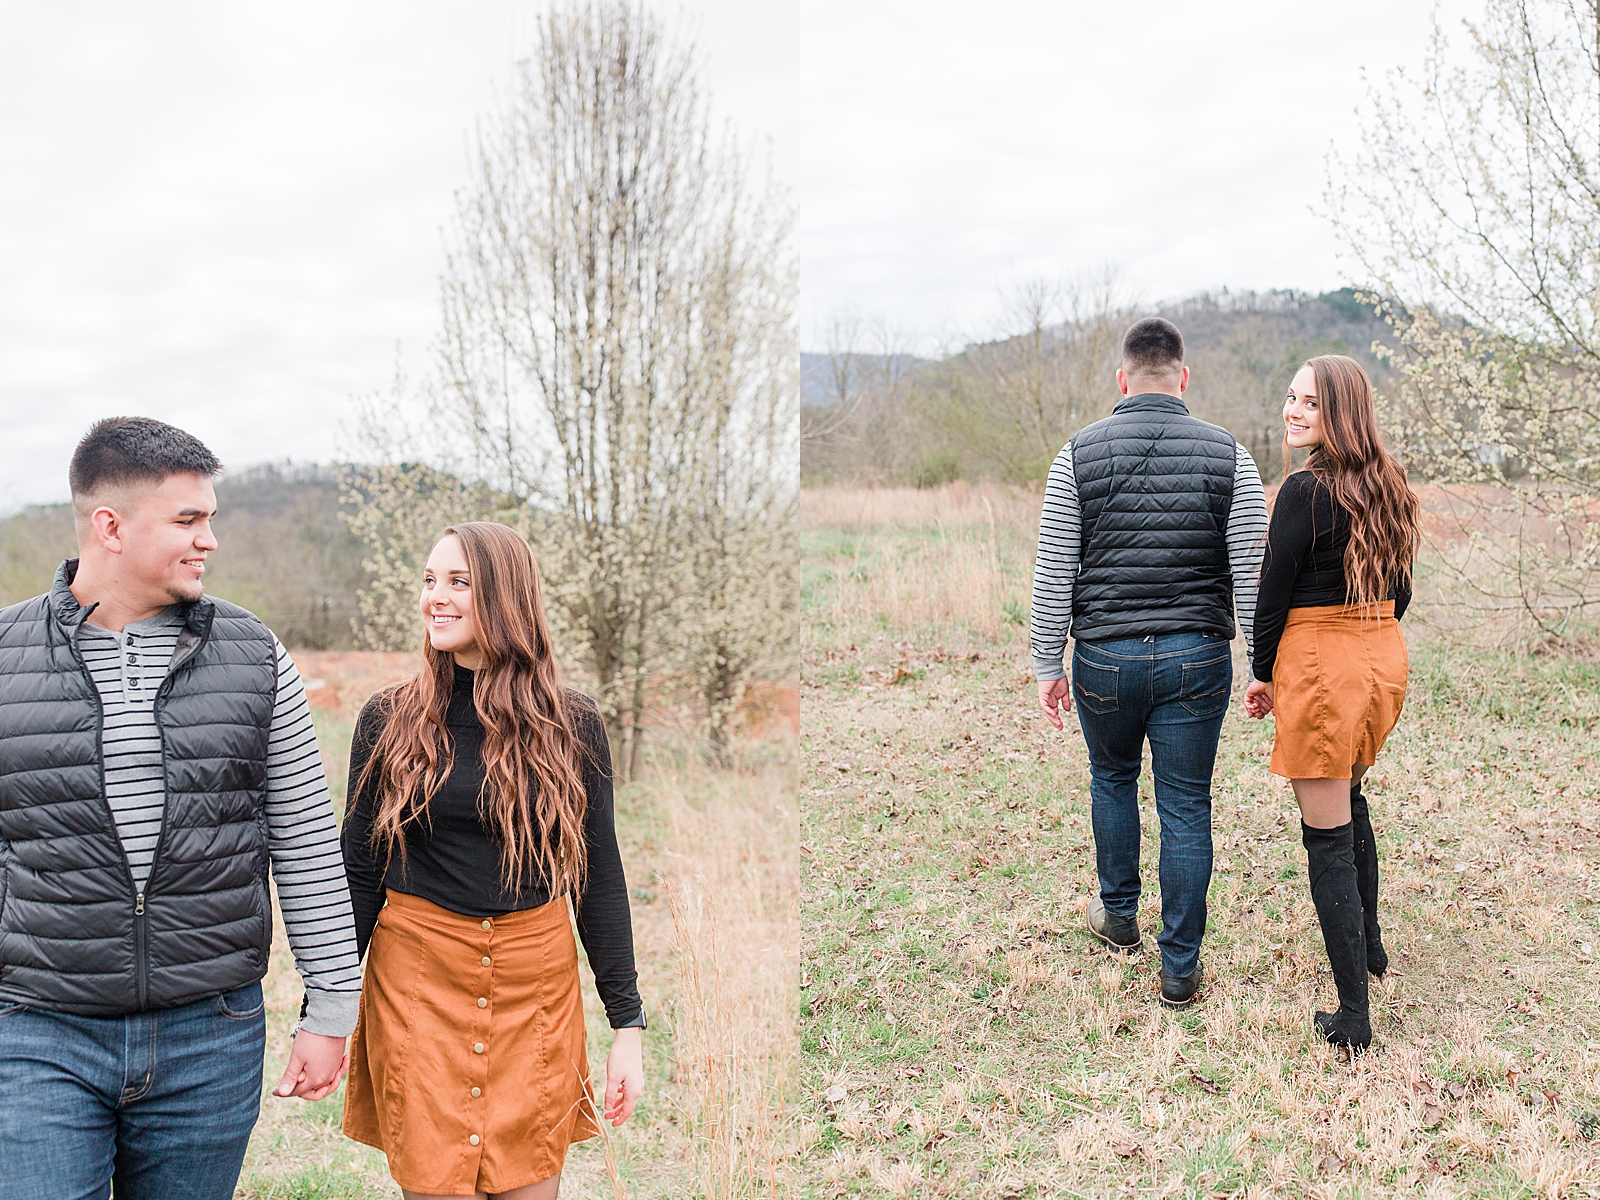 Andrews NC Spring Session Couple holding hands walking in a field Photos